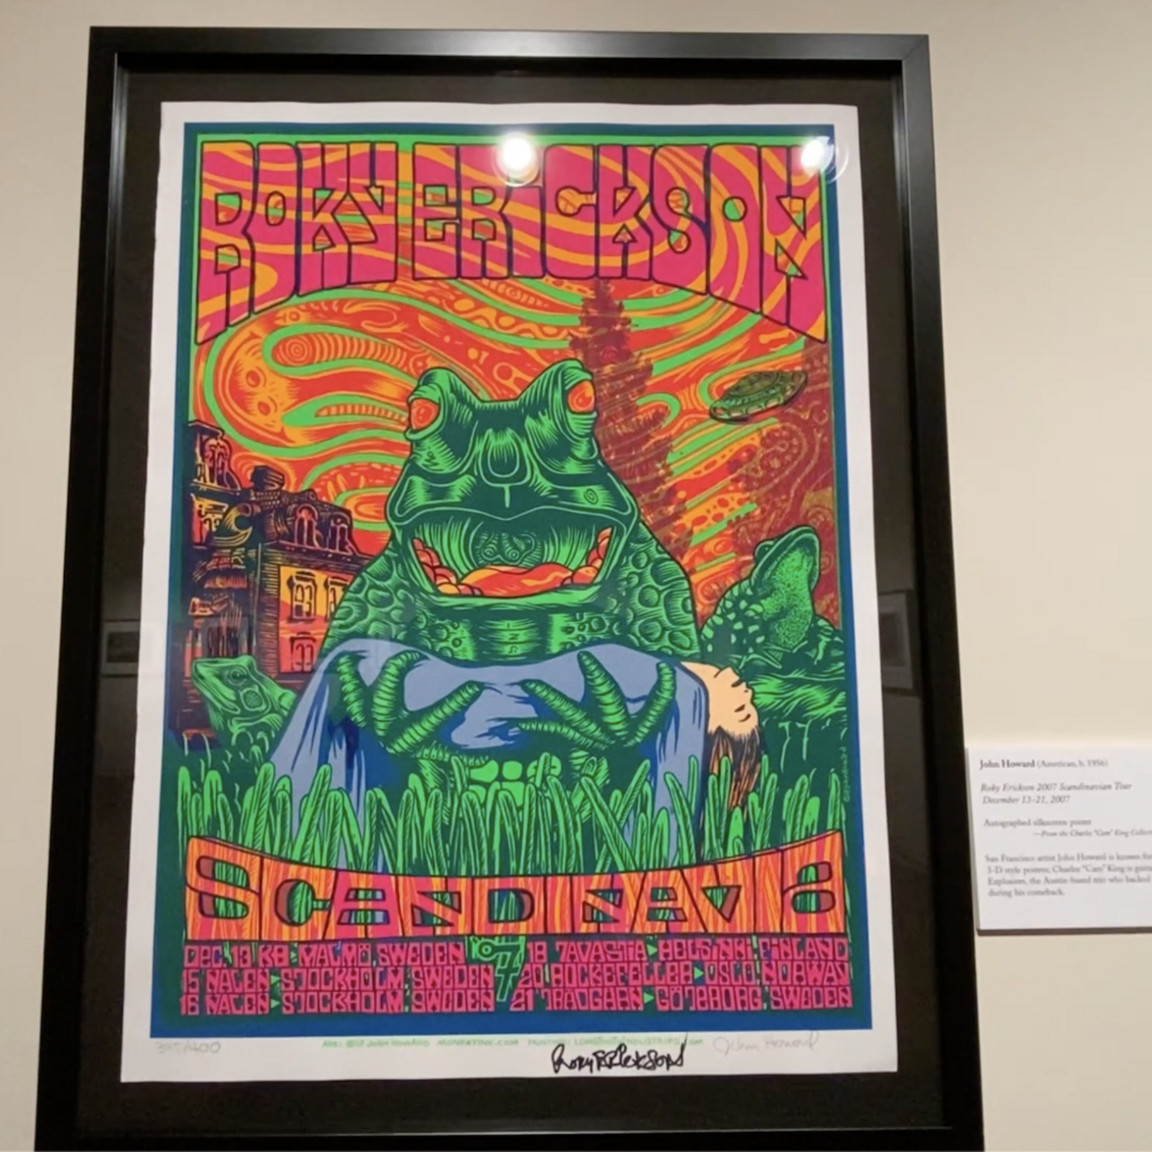 Concert poster from Texas Music Collection